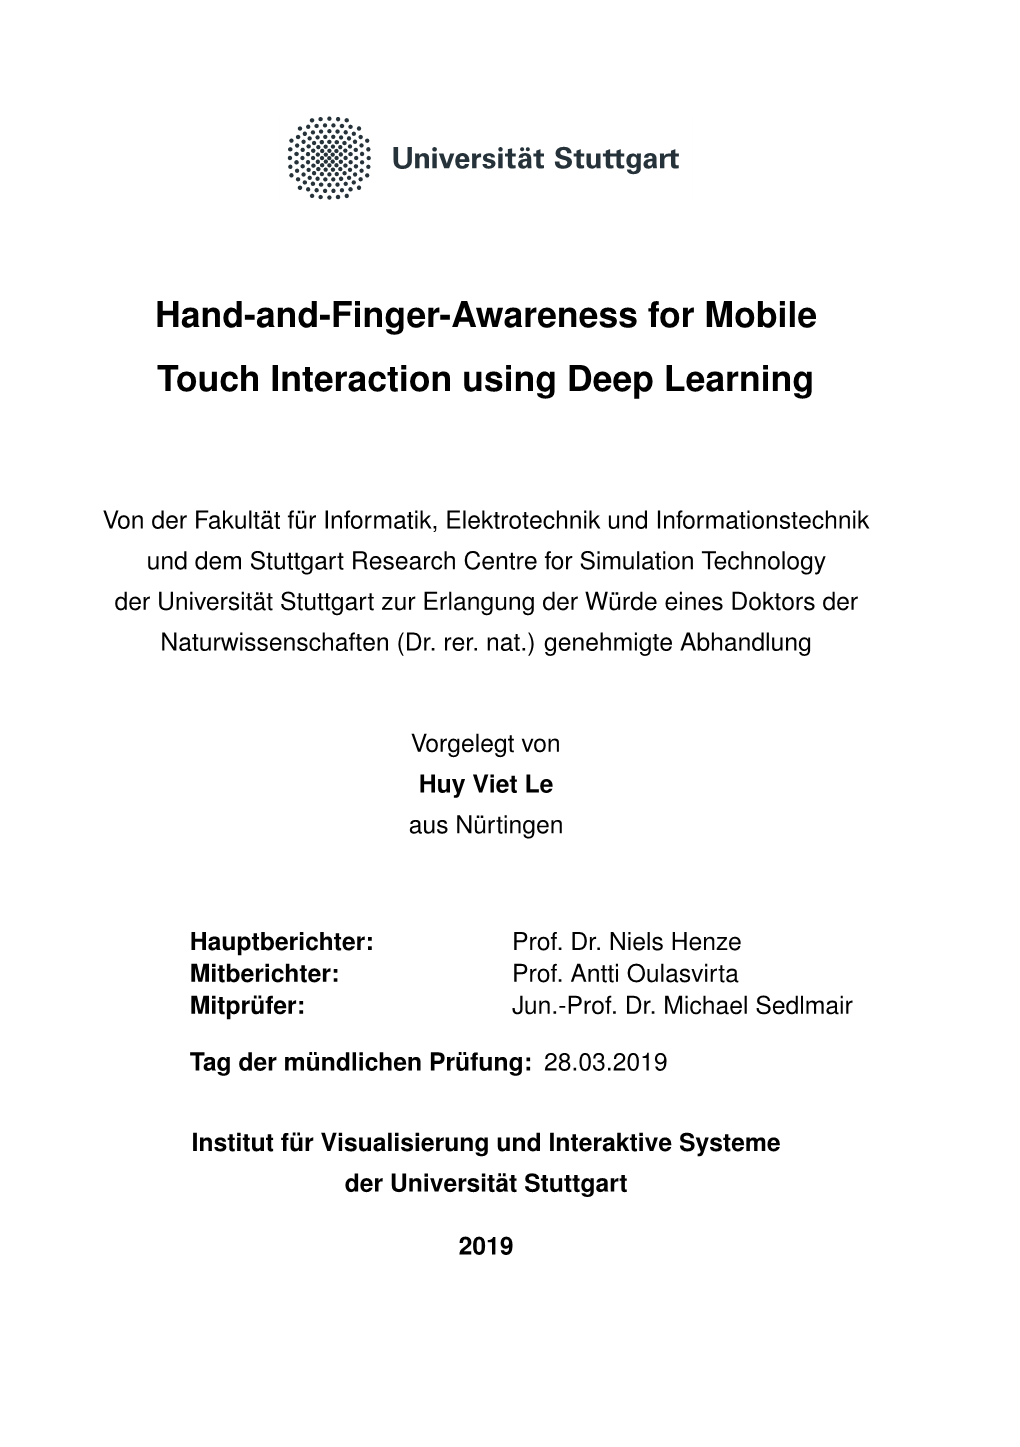 Hand-And-Finger-Awareness for Mobiletouch Interaction Using